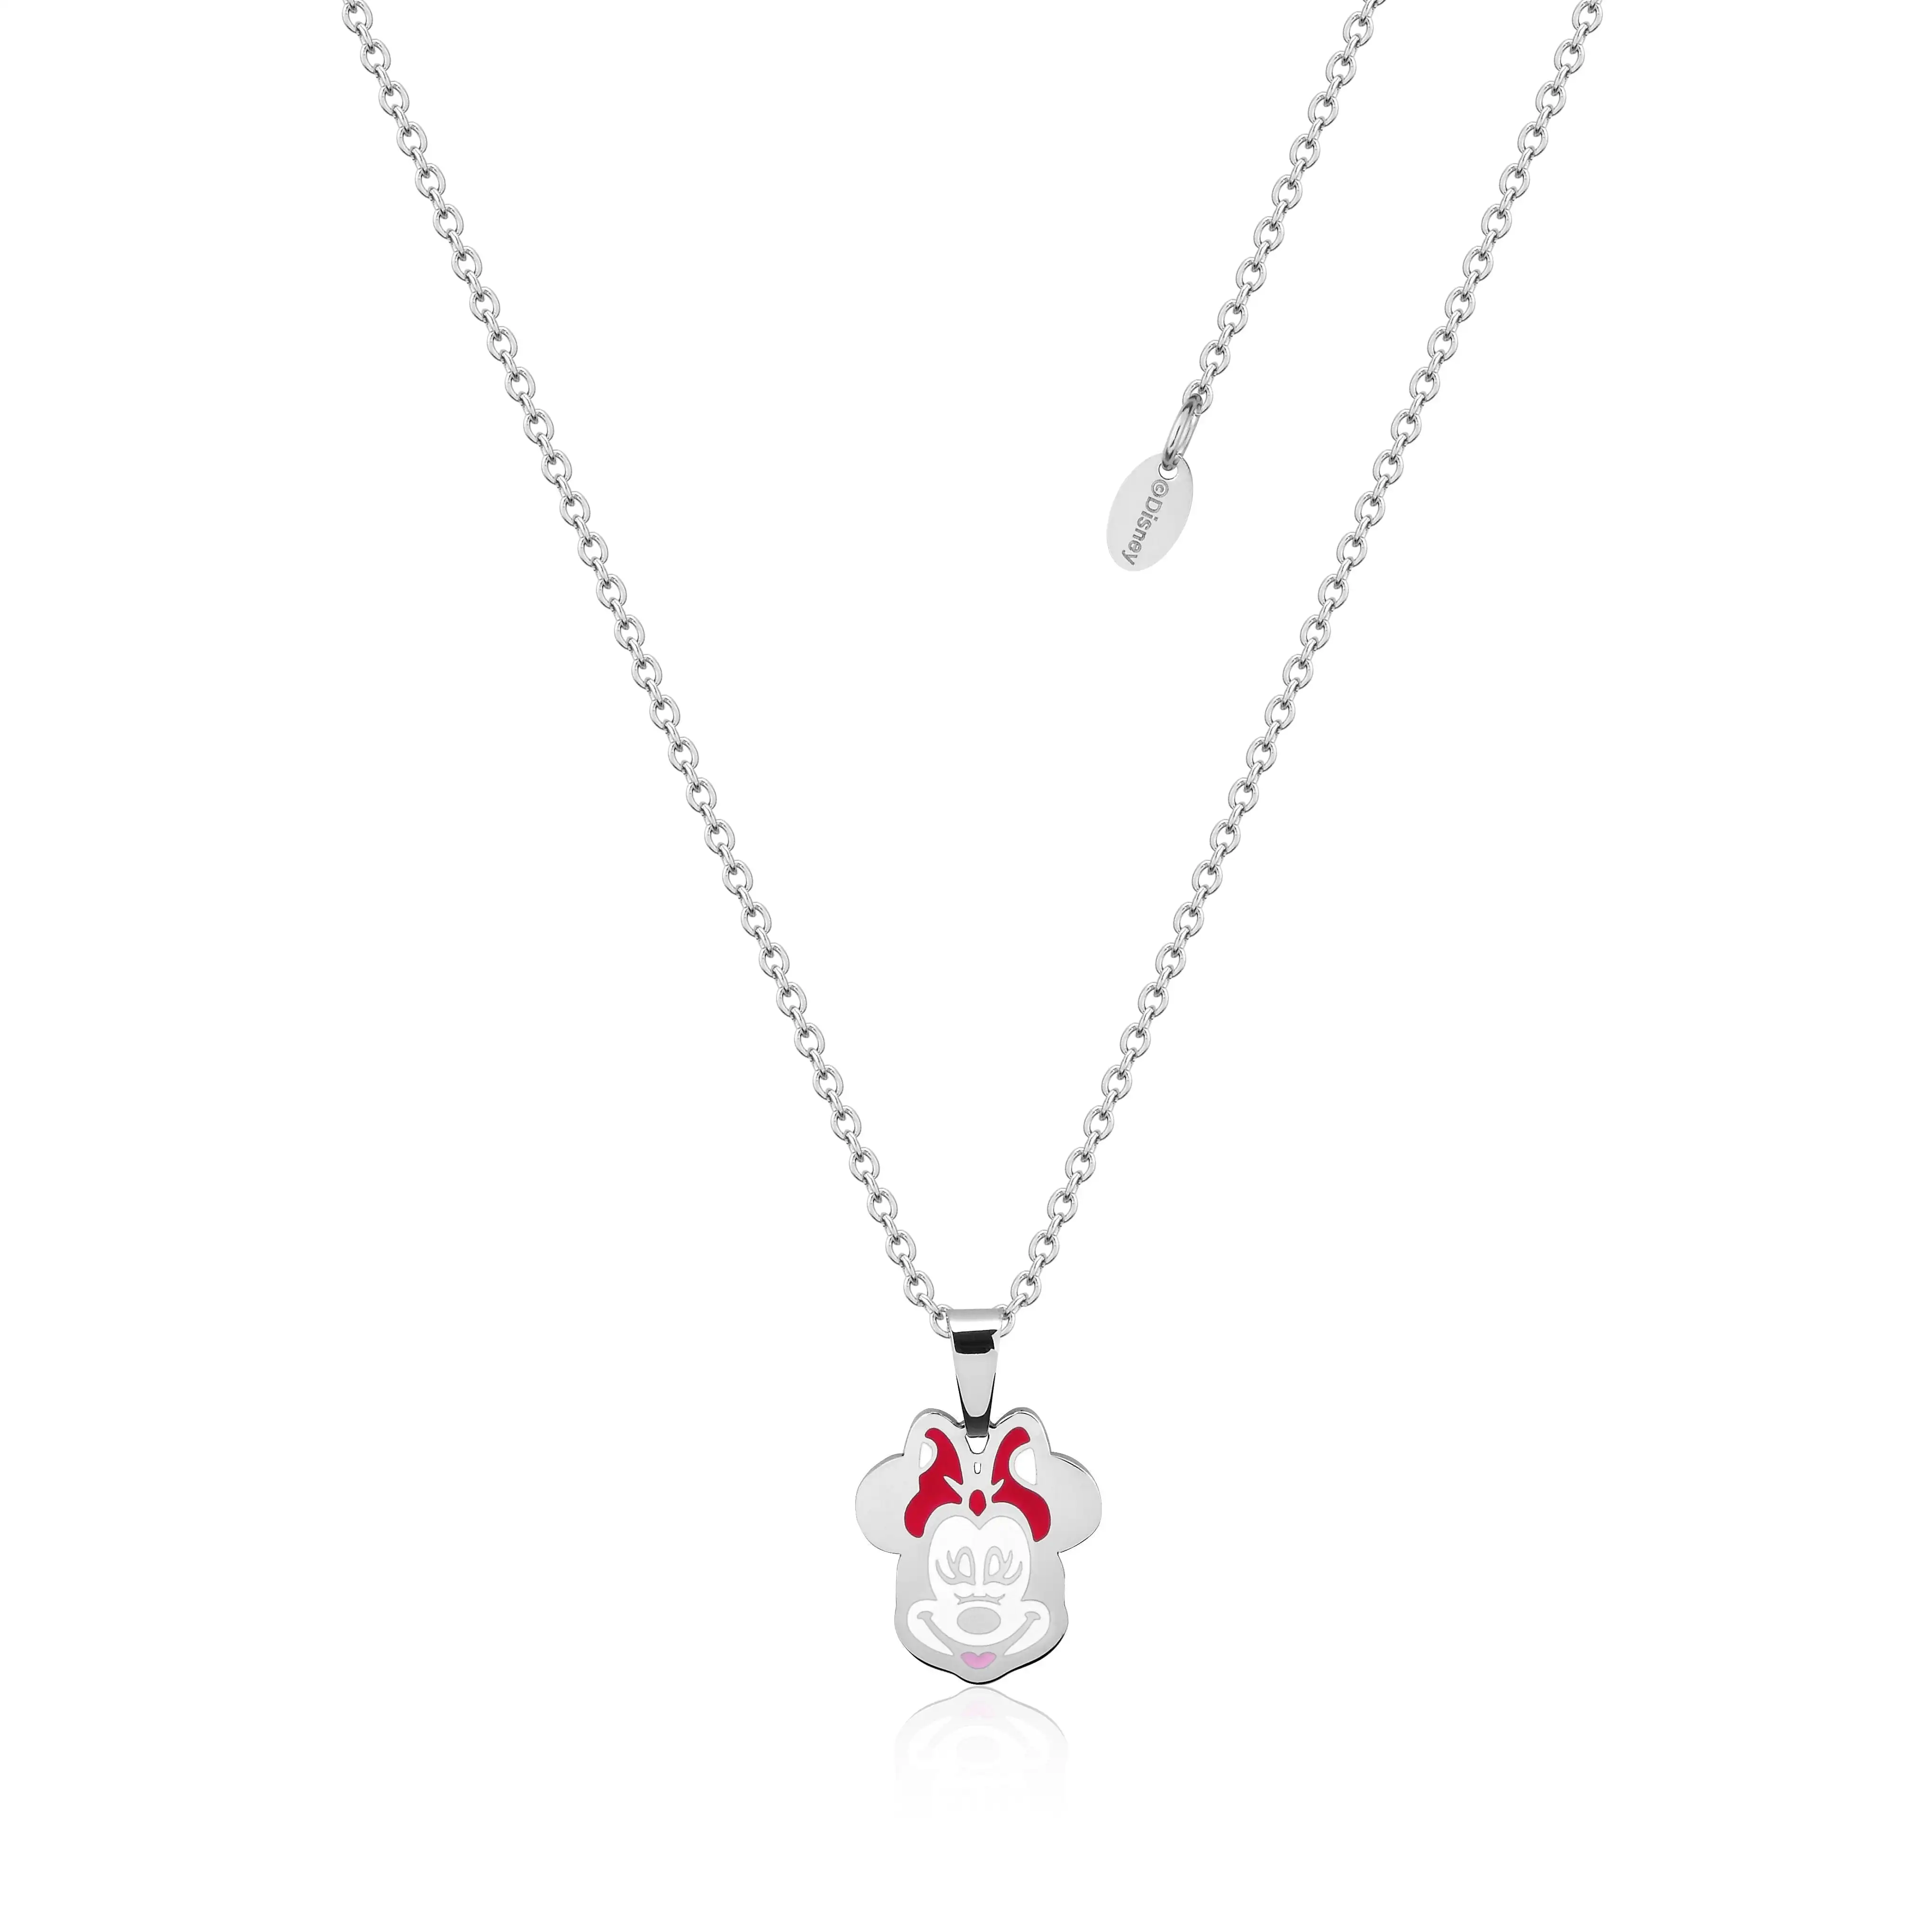 Disney Stainless Steel 47cm Animated Minnie Mouse Pendant on Chain